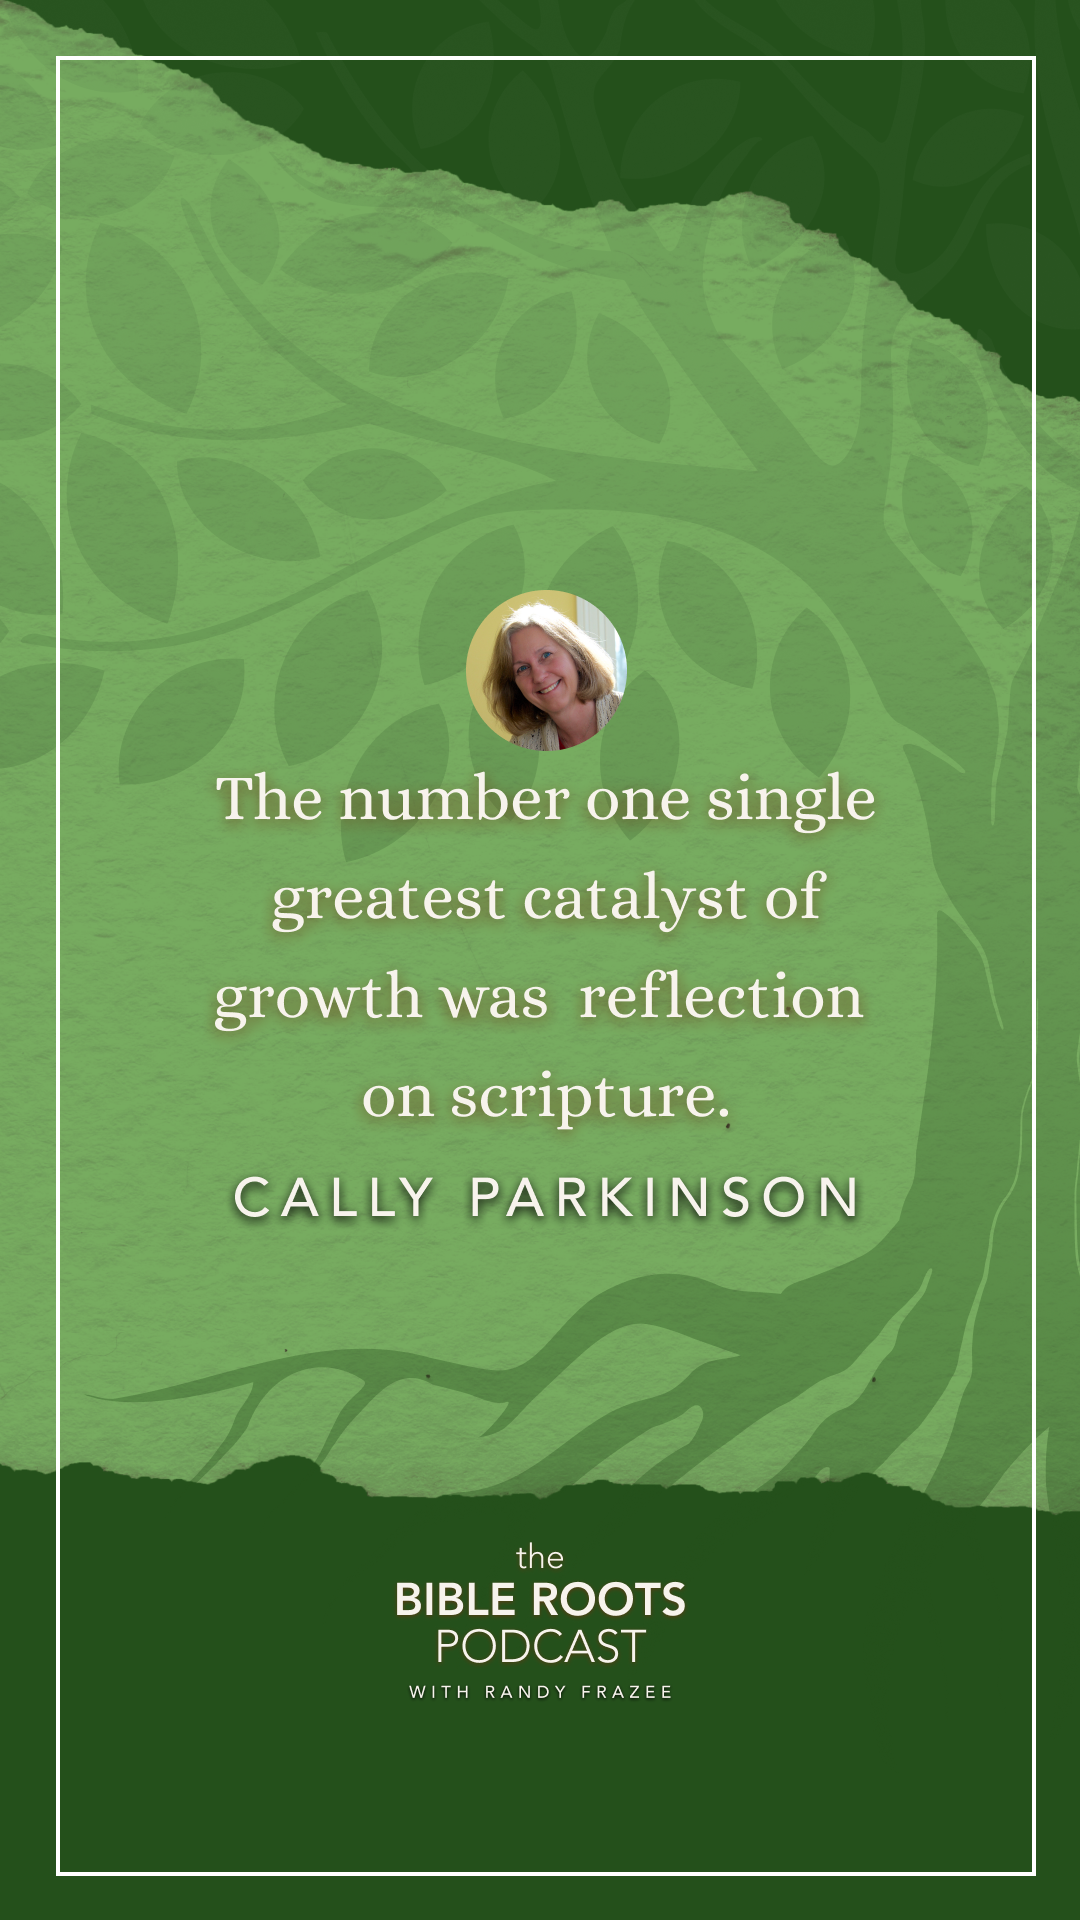 "The number one single greatest catalyst of growth was reflection on scripture"